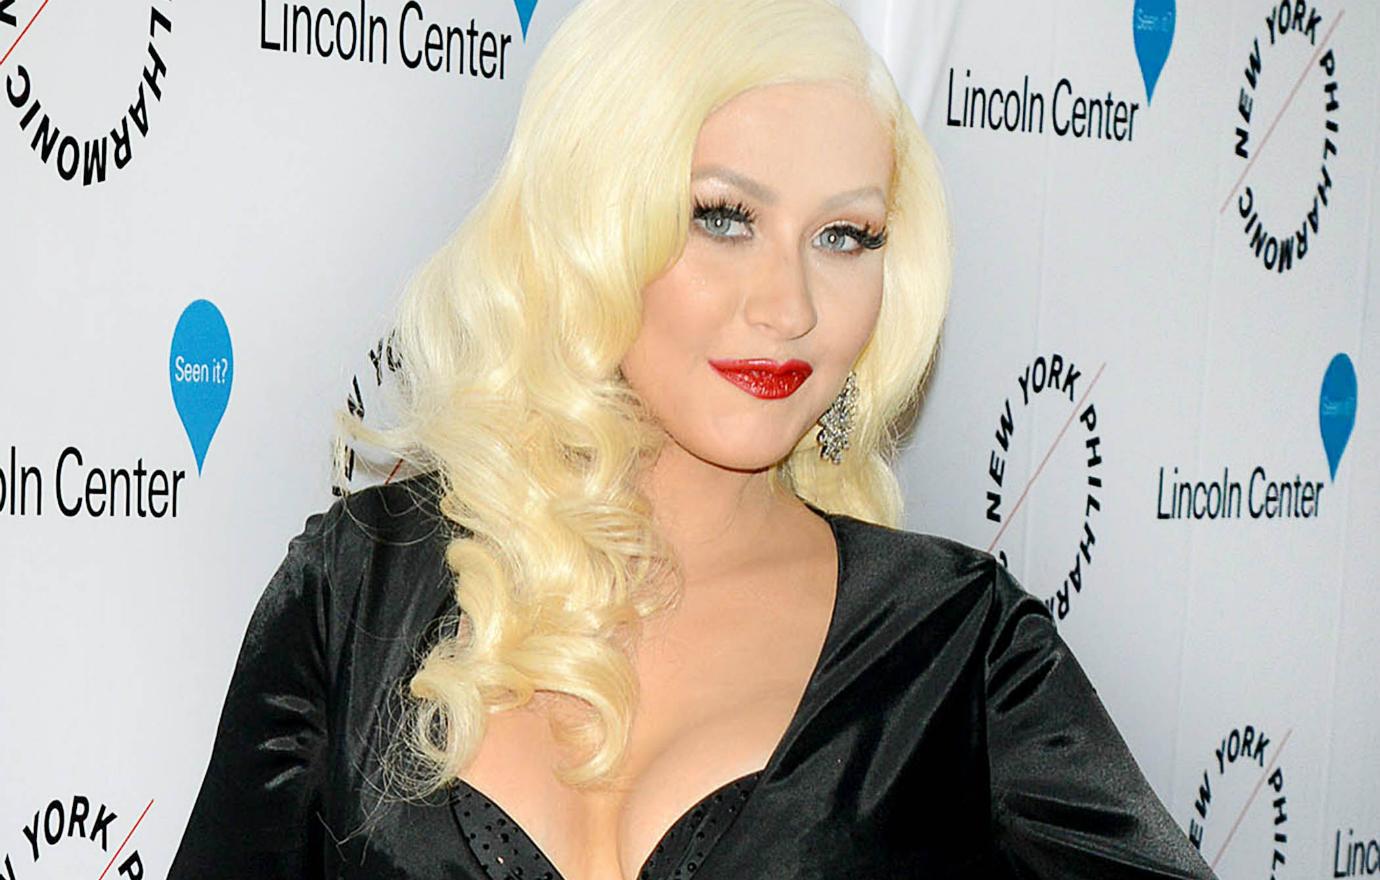 Christina Aguilera wears a low cut black dress with red lip and platinum blonde hair in loose curls at this 2015 Lincoln Center event.